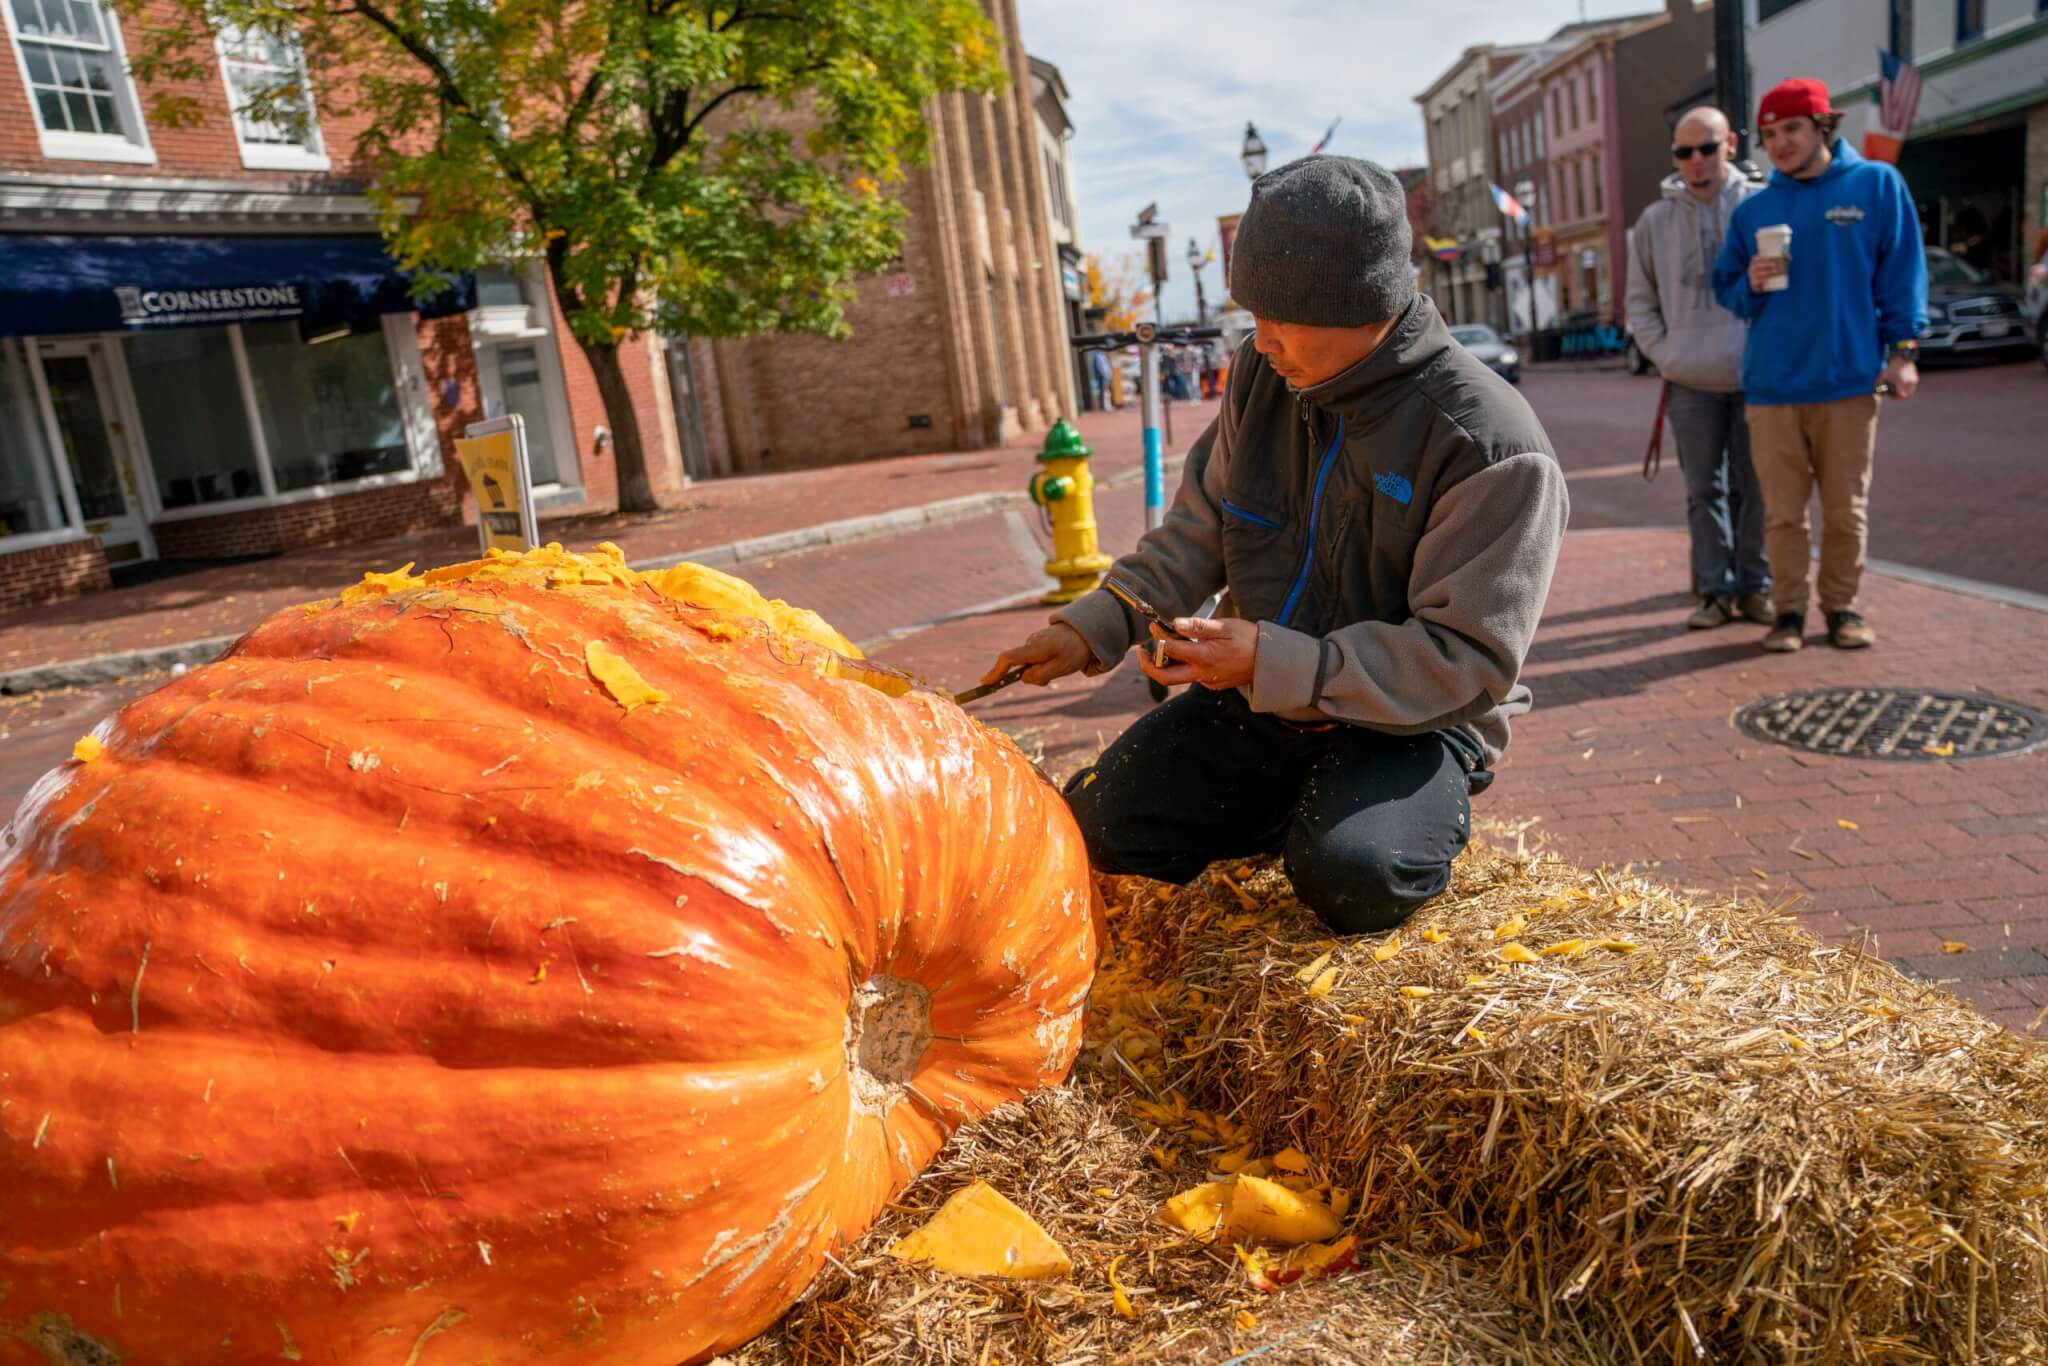 Angelito Baban carves The Hulk into a giant pumpkin at the Great Annapolis Pumpkin Patch in Annapolis, Maryland, USA, 28 October 2022. Over the Halloween weekend Annapolis is hosting a giant pumpkin carving contest, ghost tours, scarecrow walks, and Halloween concerts.